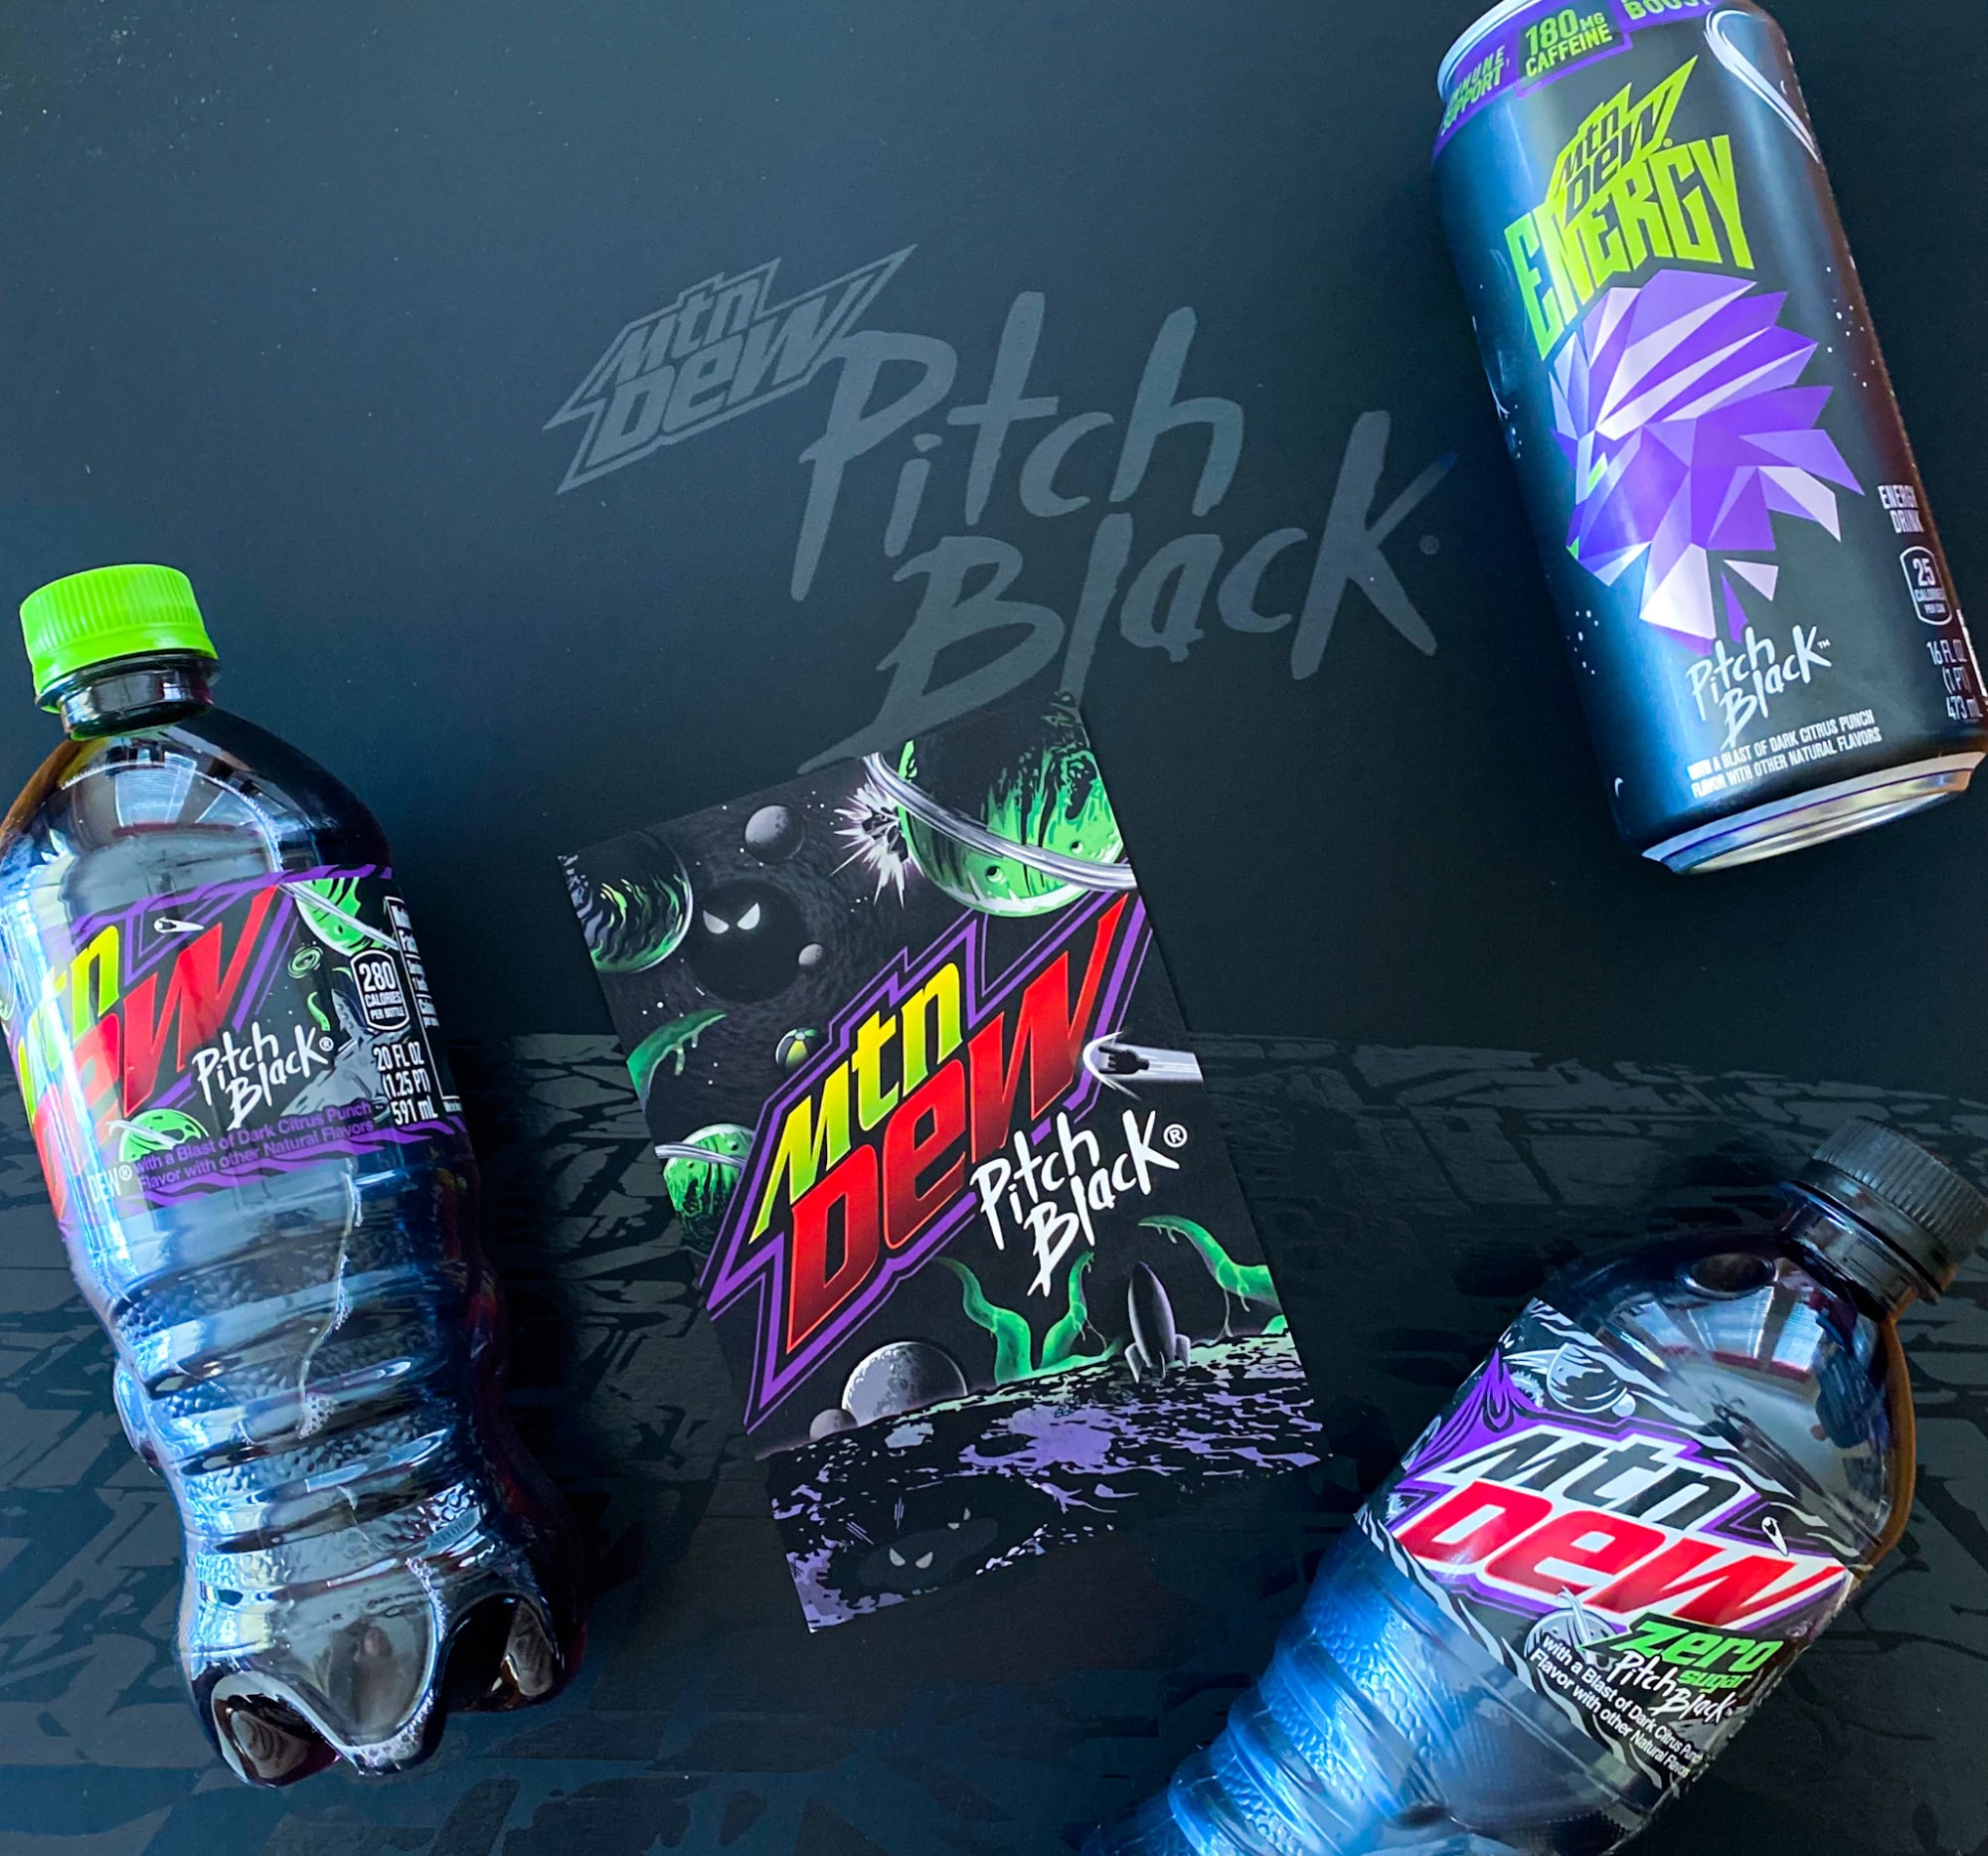 MTN DEW Pitch Black quenches the first for the darker side of citrus